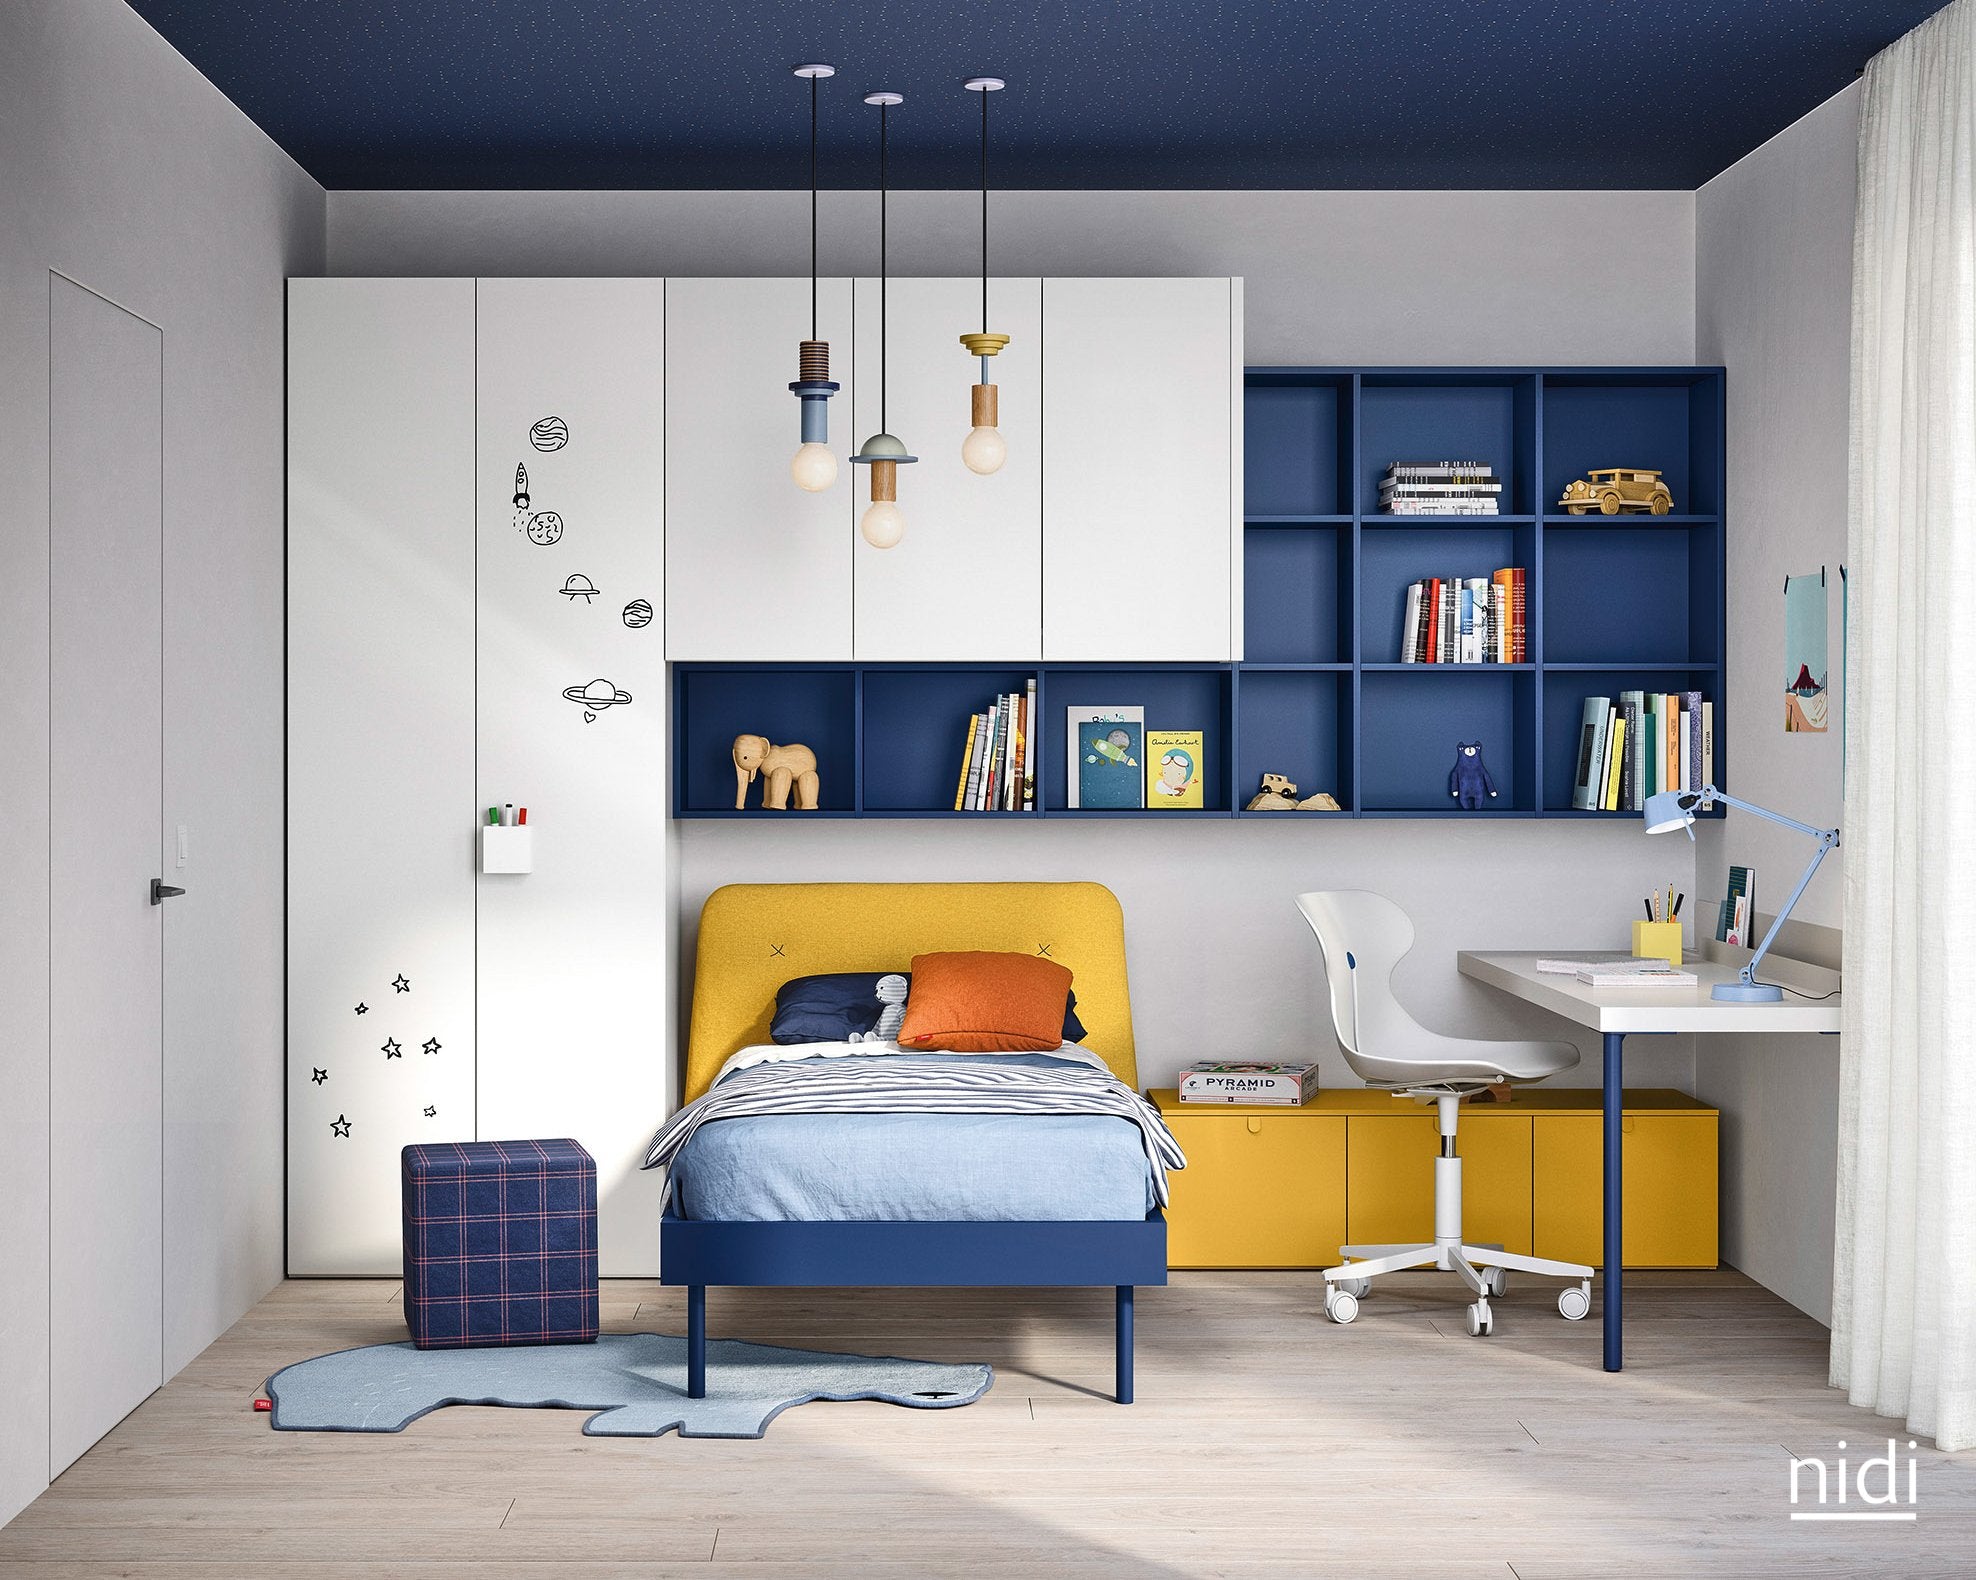 Nubie’s Top Tips On Improving The State Of Your Child’s Bedroom